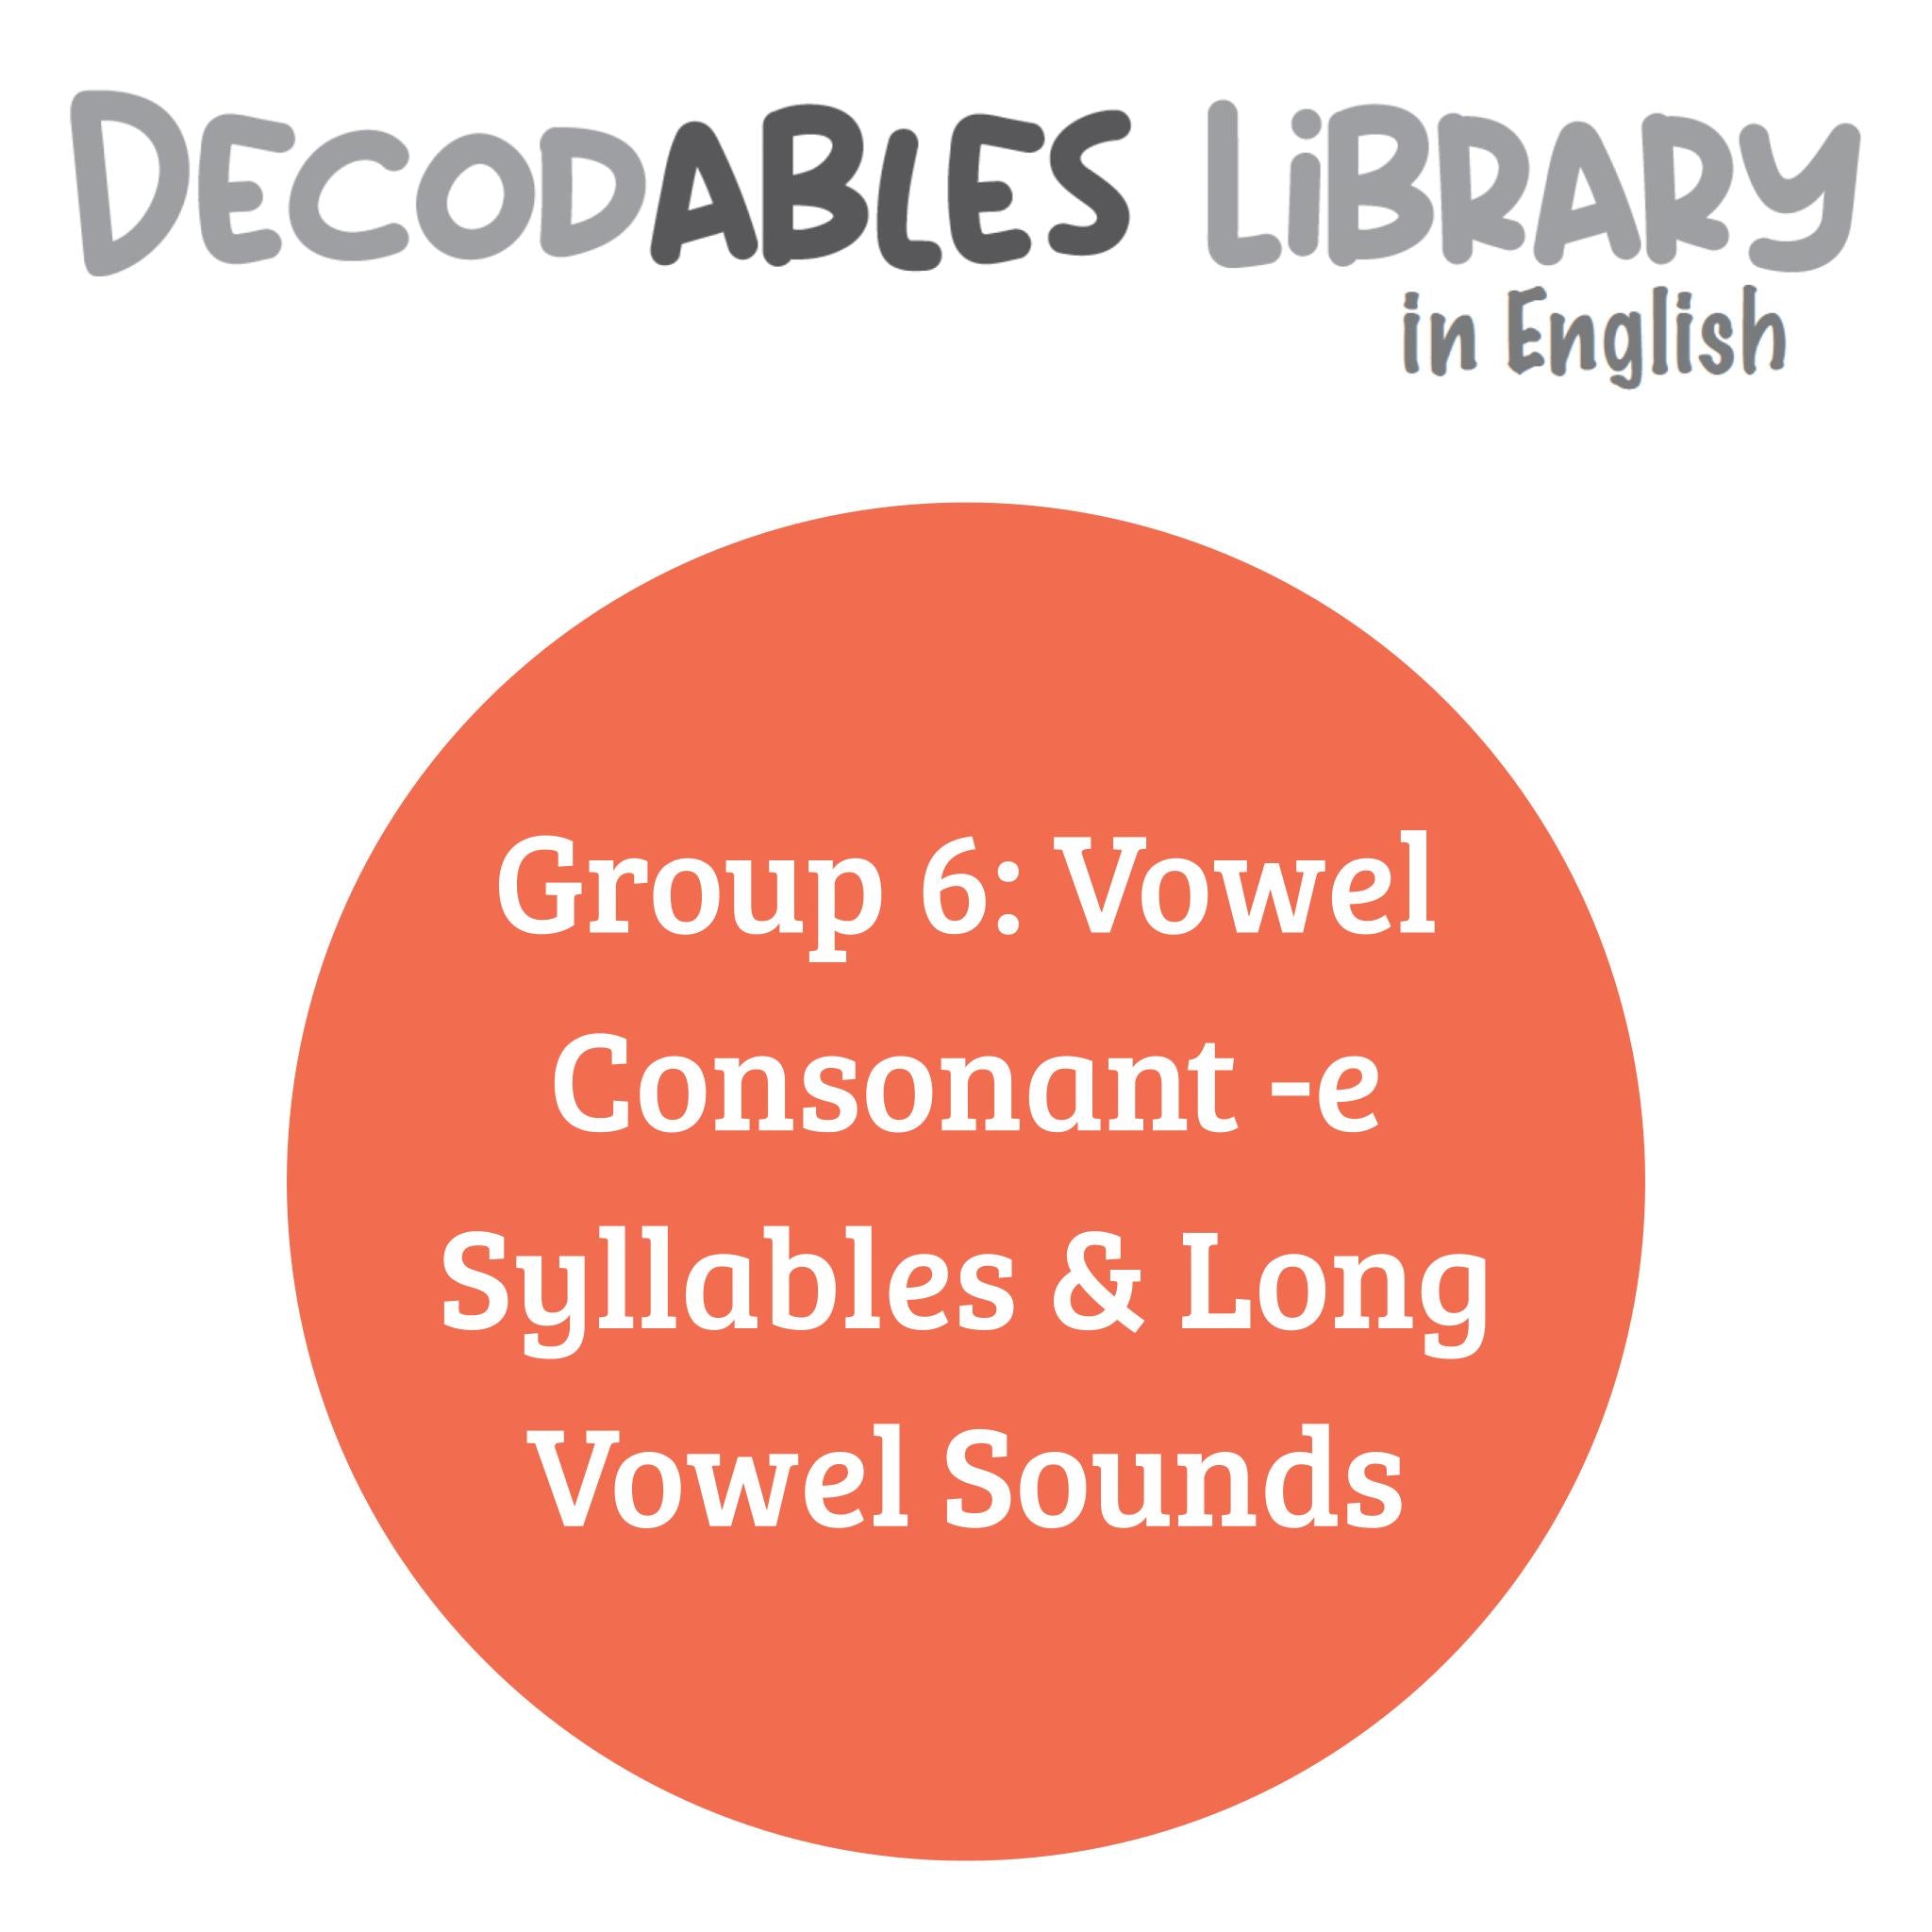 English Decodables Library - Group 6: Vowel Consonant -e Syllables & Long Vowel Sounds (set of 23 titles)